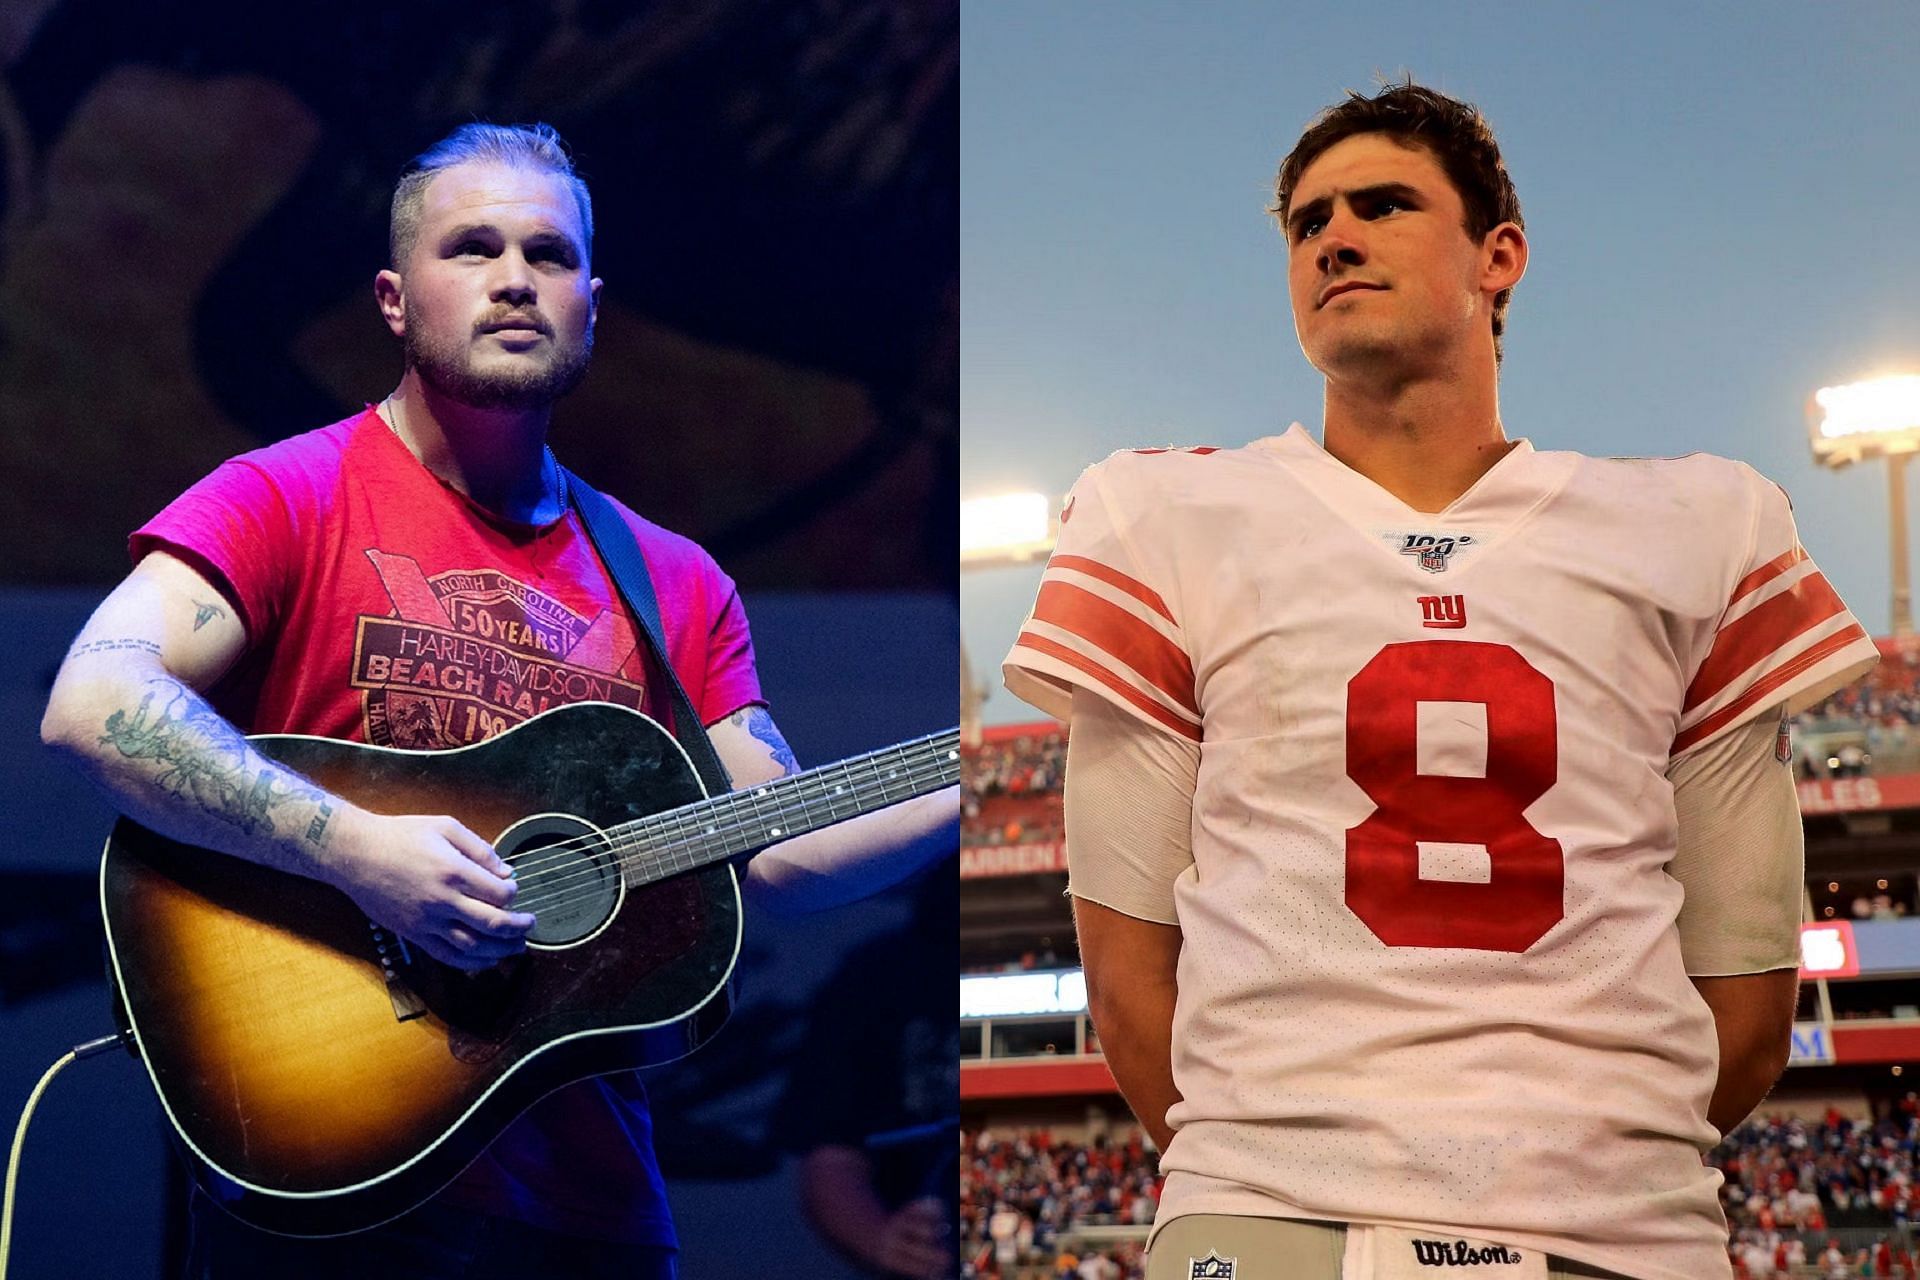 Giants QB Daniel Jones gets roasted by Zach Bryan onstage during NYC concert (Pic Courtesy: Billboard and Getty)